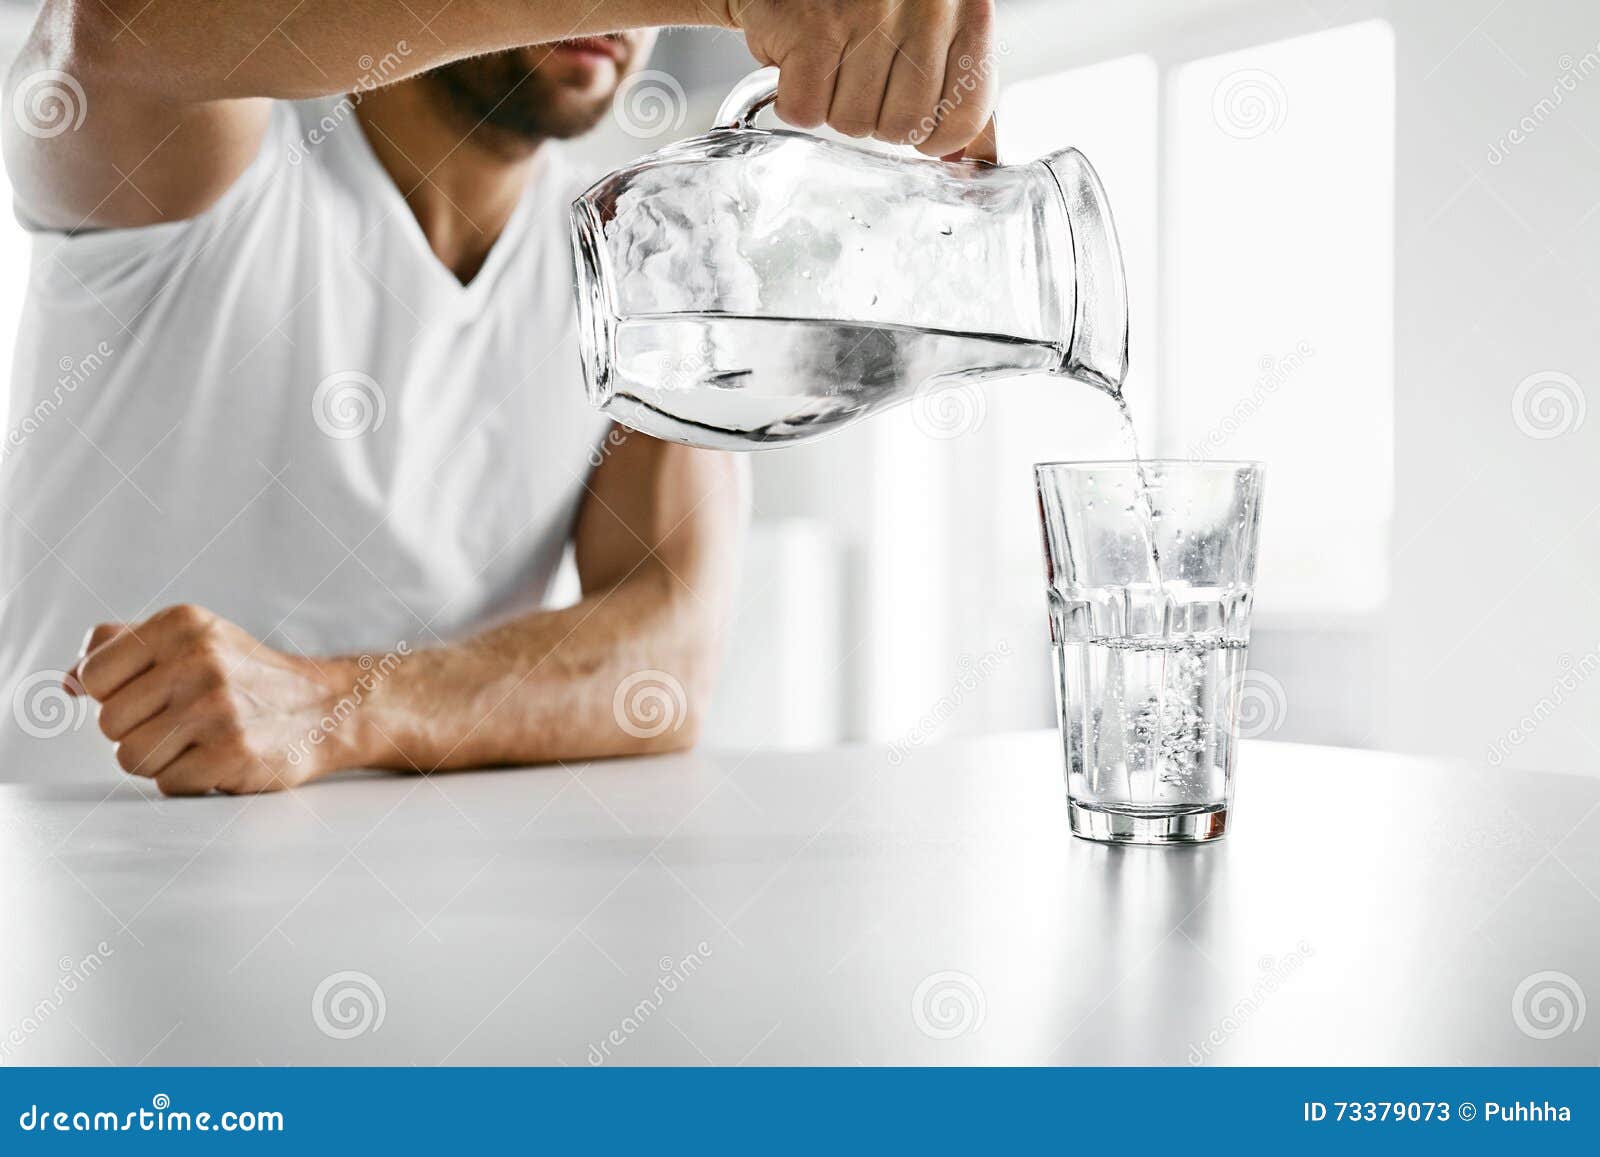 drink water. close up man pouring water into glass. hydration